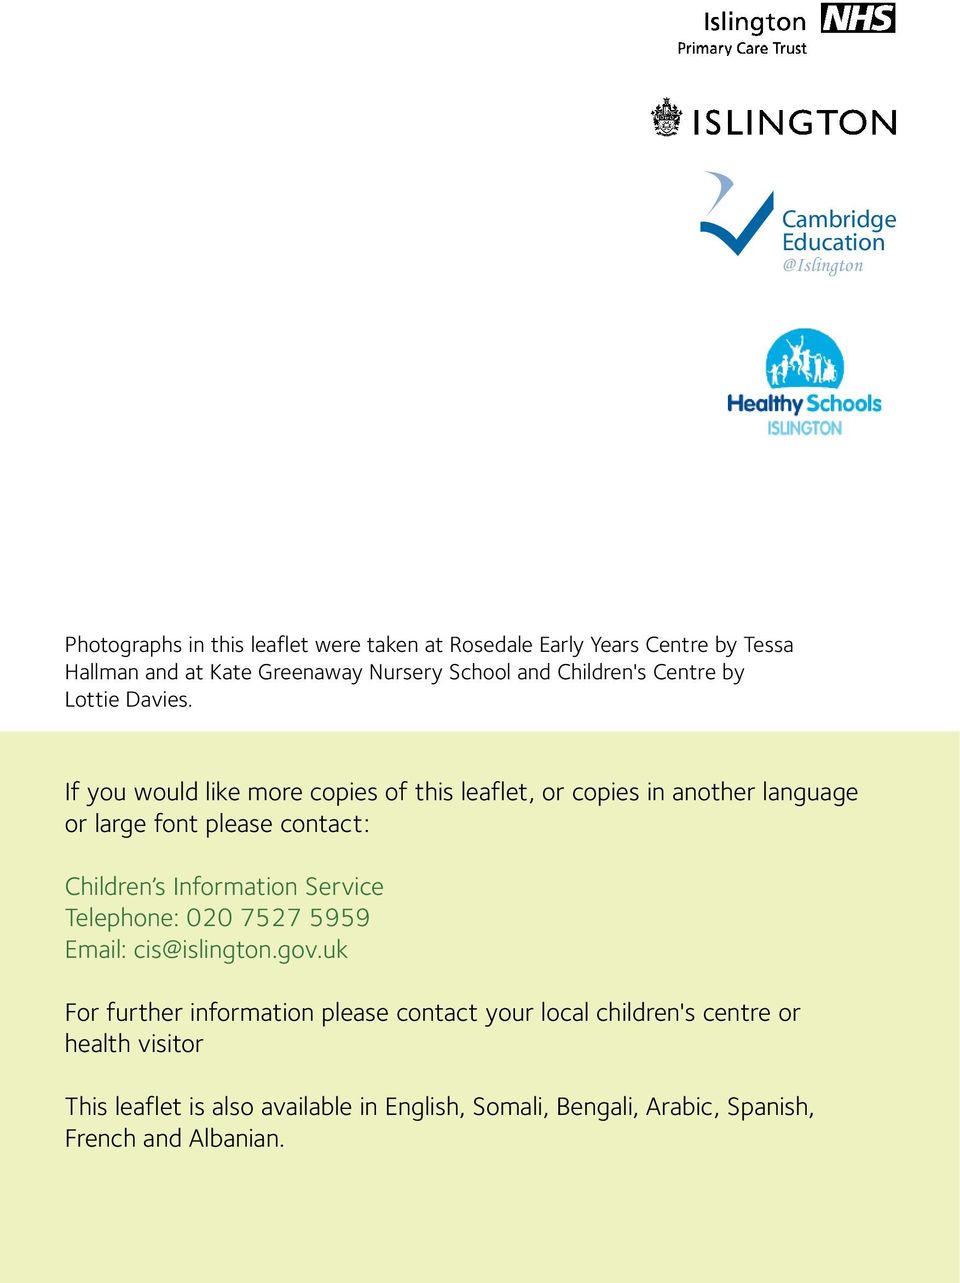 If you would like more copies of this leaflet, or copies in another language or large font please contact: Children s Information Service